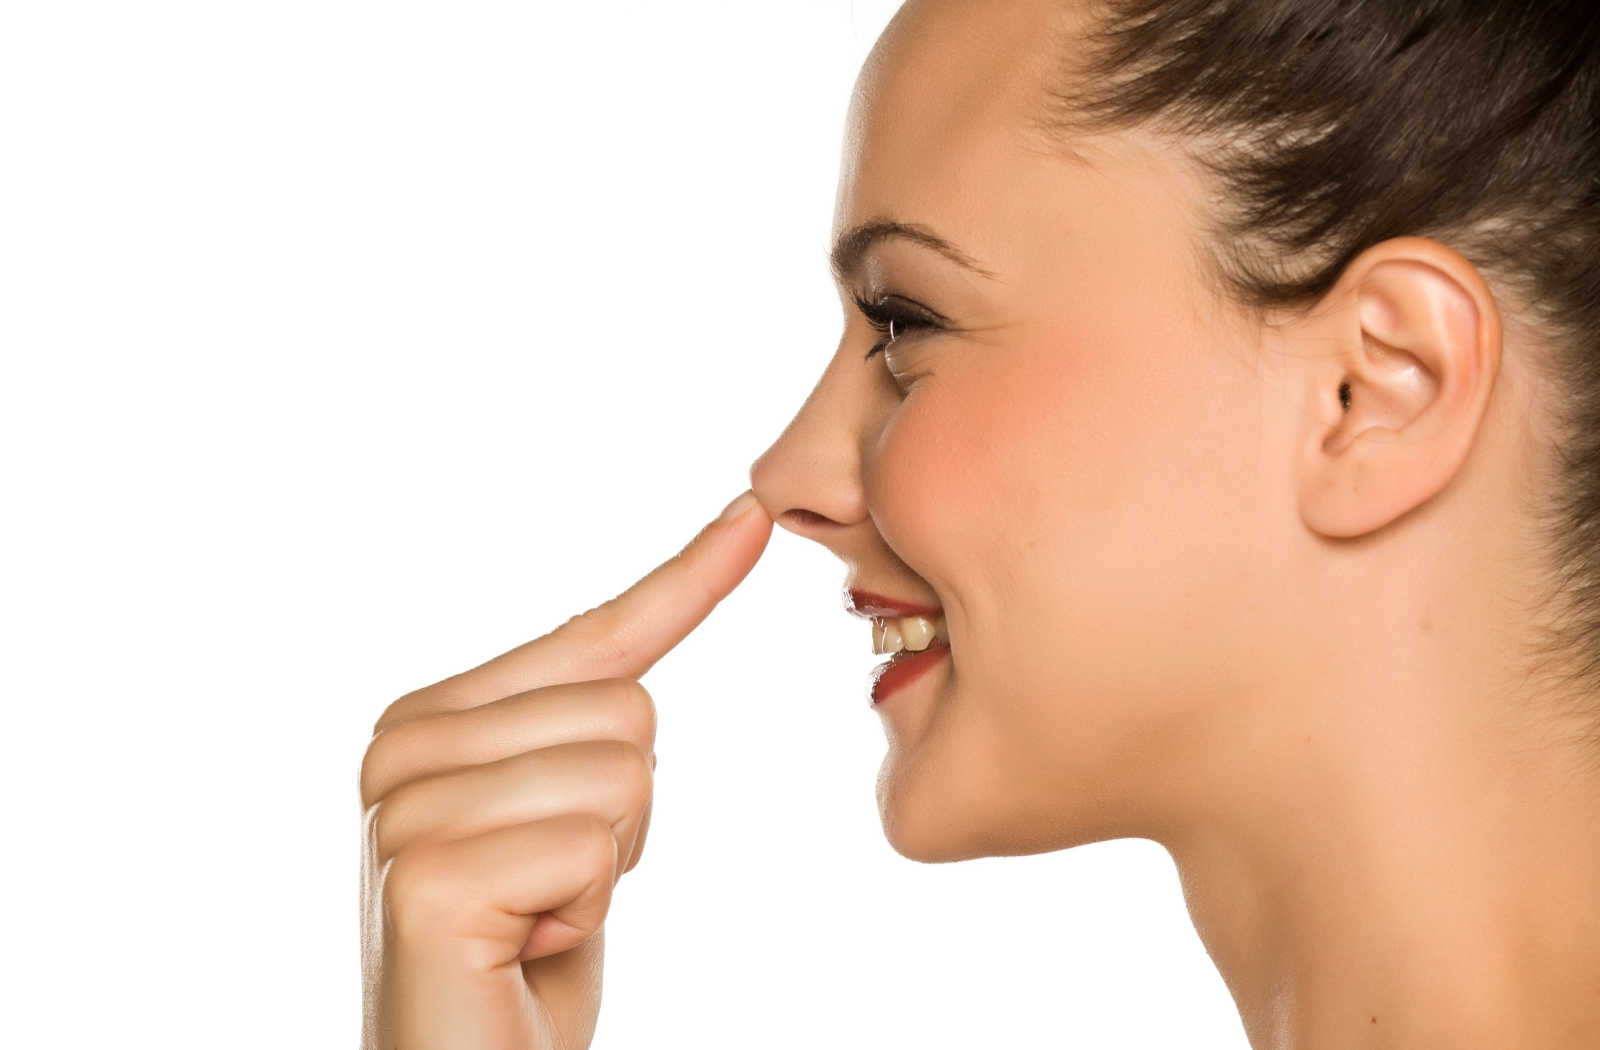 5 Facts About Nonsurgical Nose Jobs